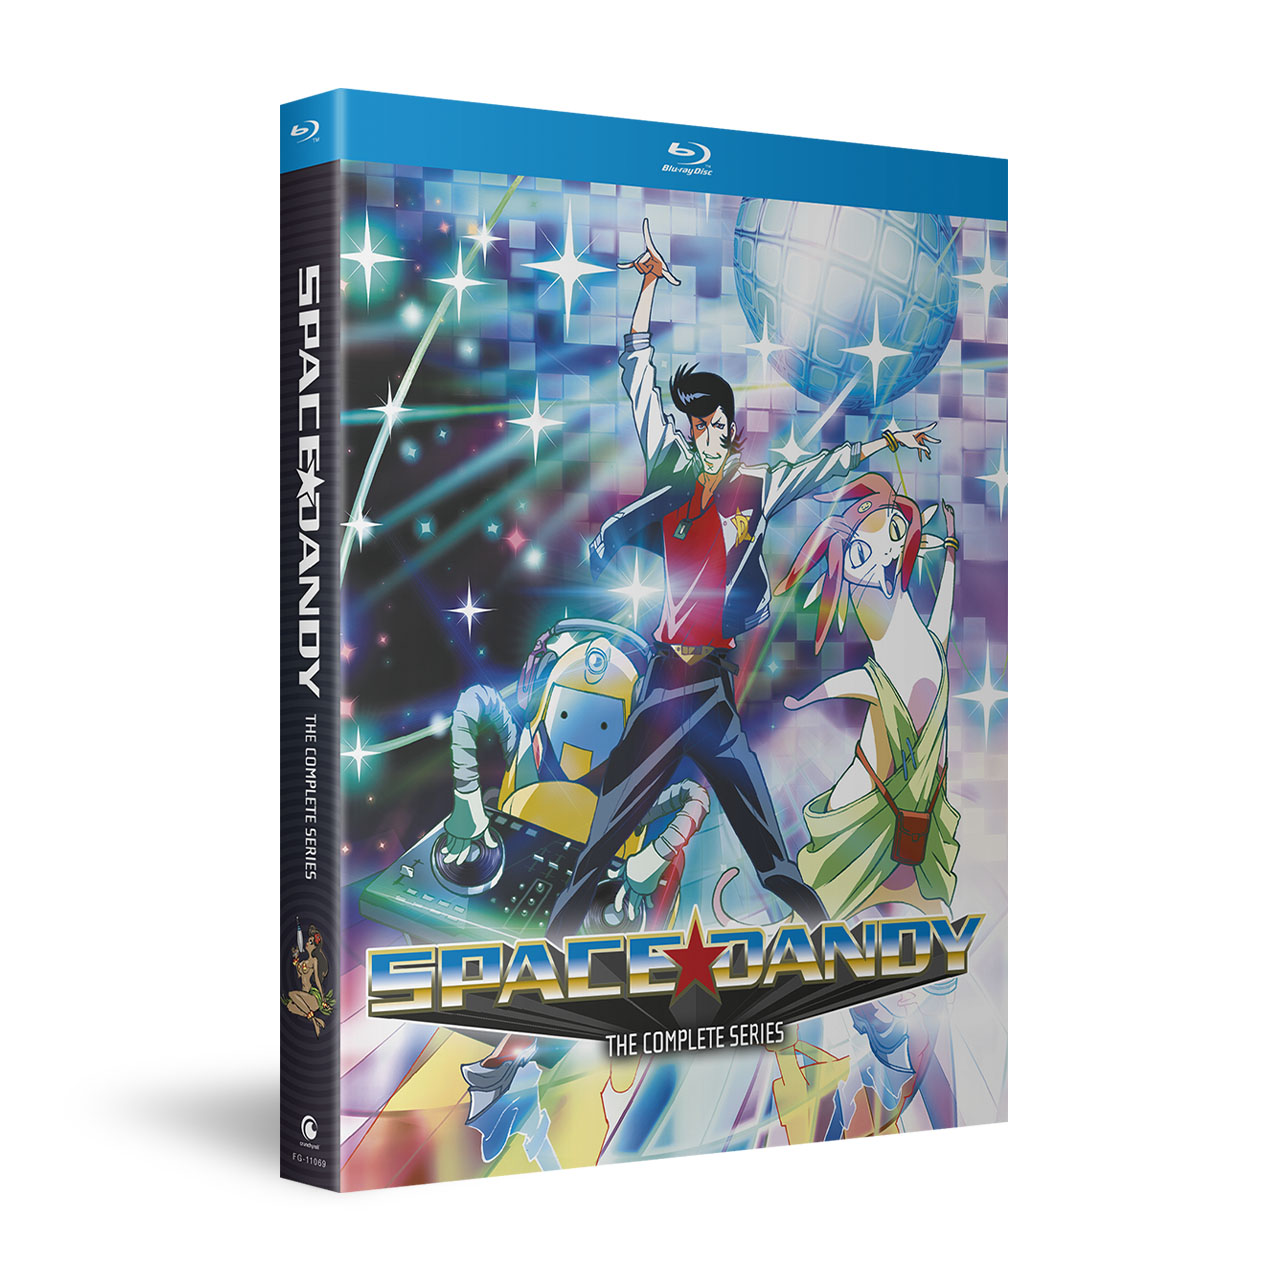 Space Dandy - The Complete Series - Blu-ray